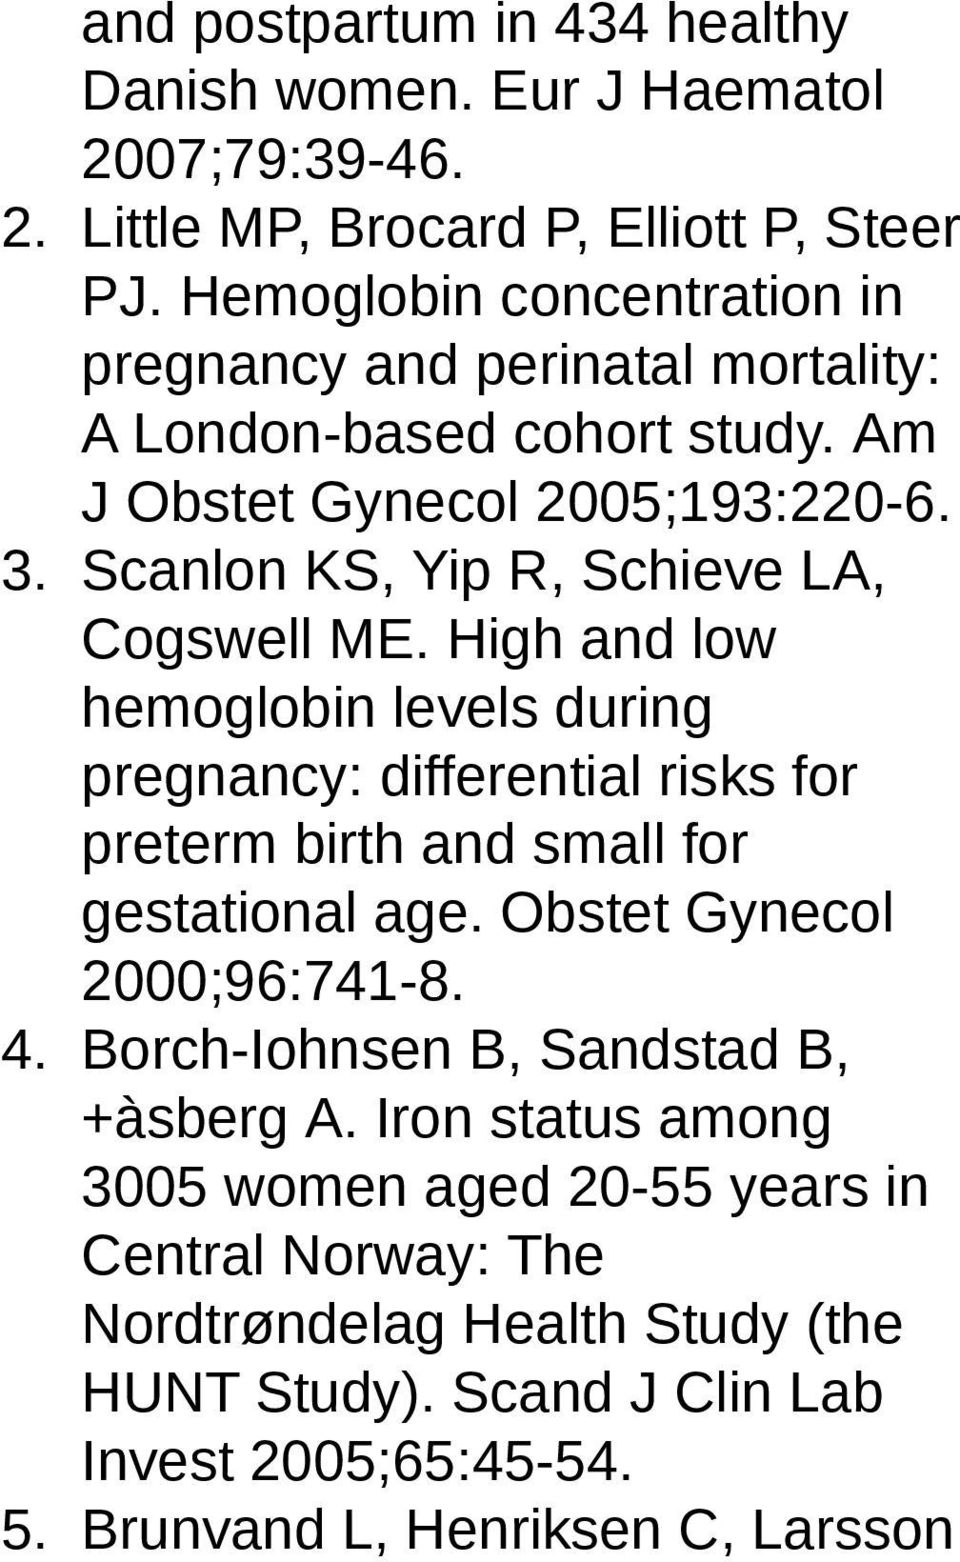 Scanlon KS, Yip R, Schieve LA, Cogswell ME. High and low hemoglobin levels during pregnancy: differential risks for preterm birth and small for gestational age.